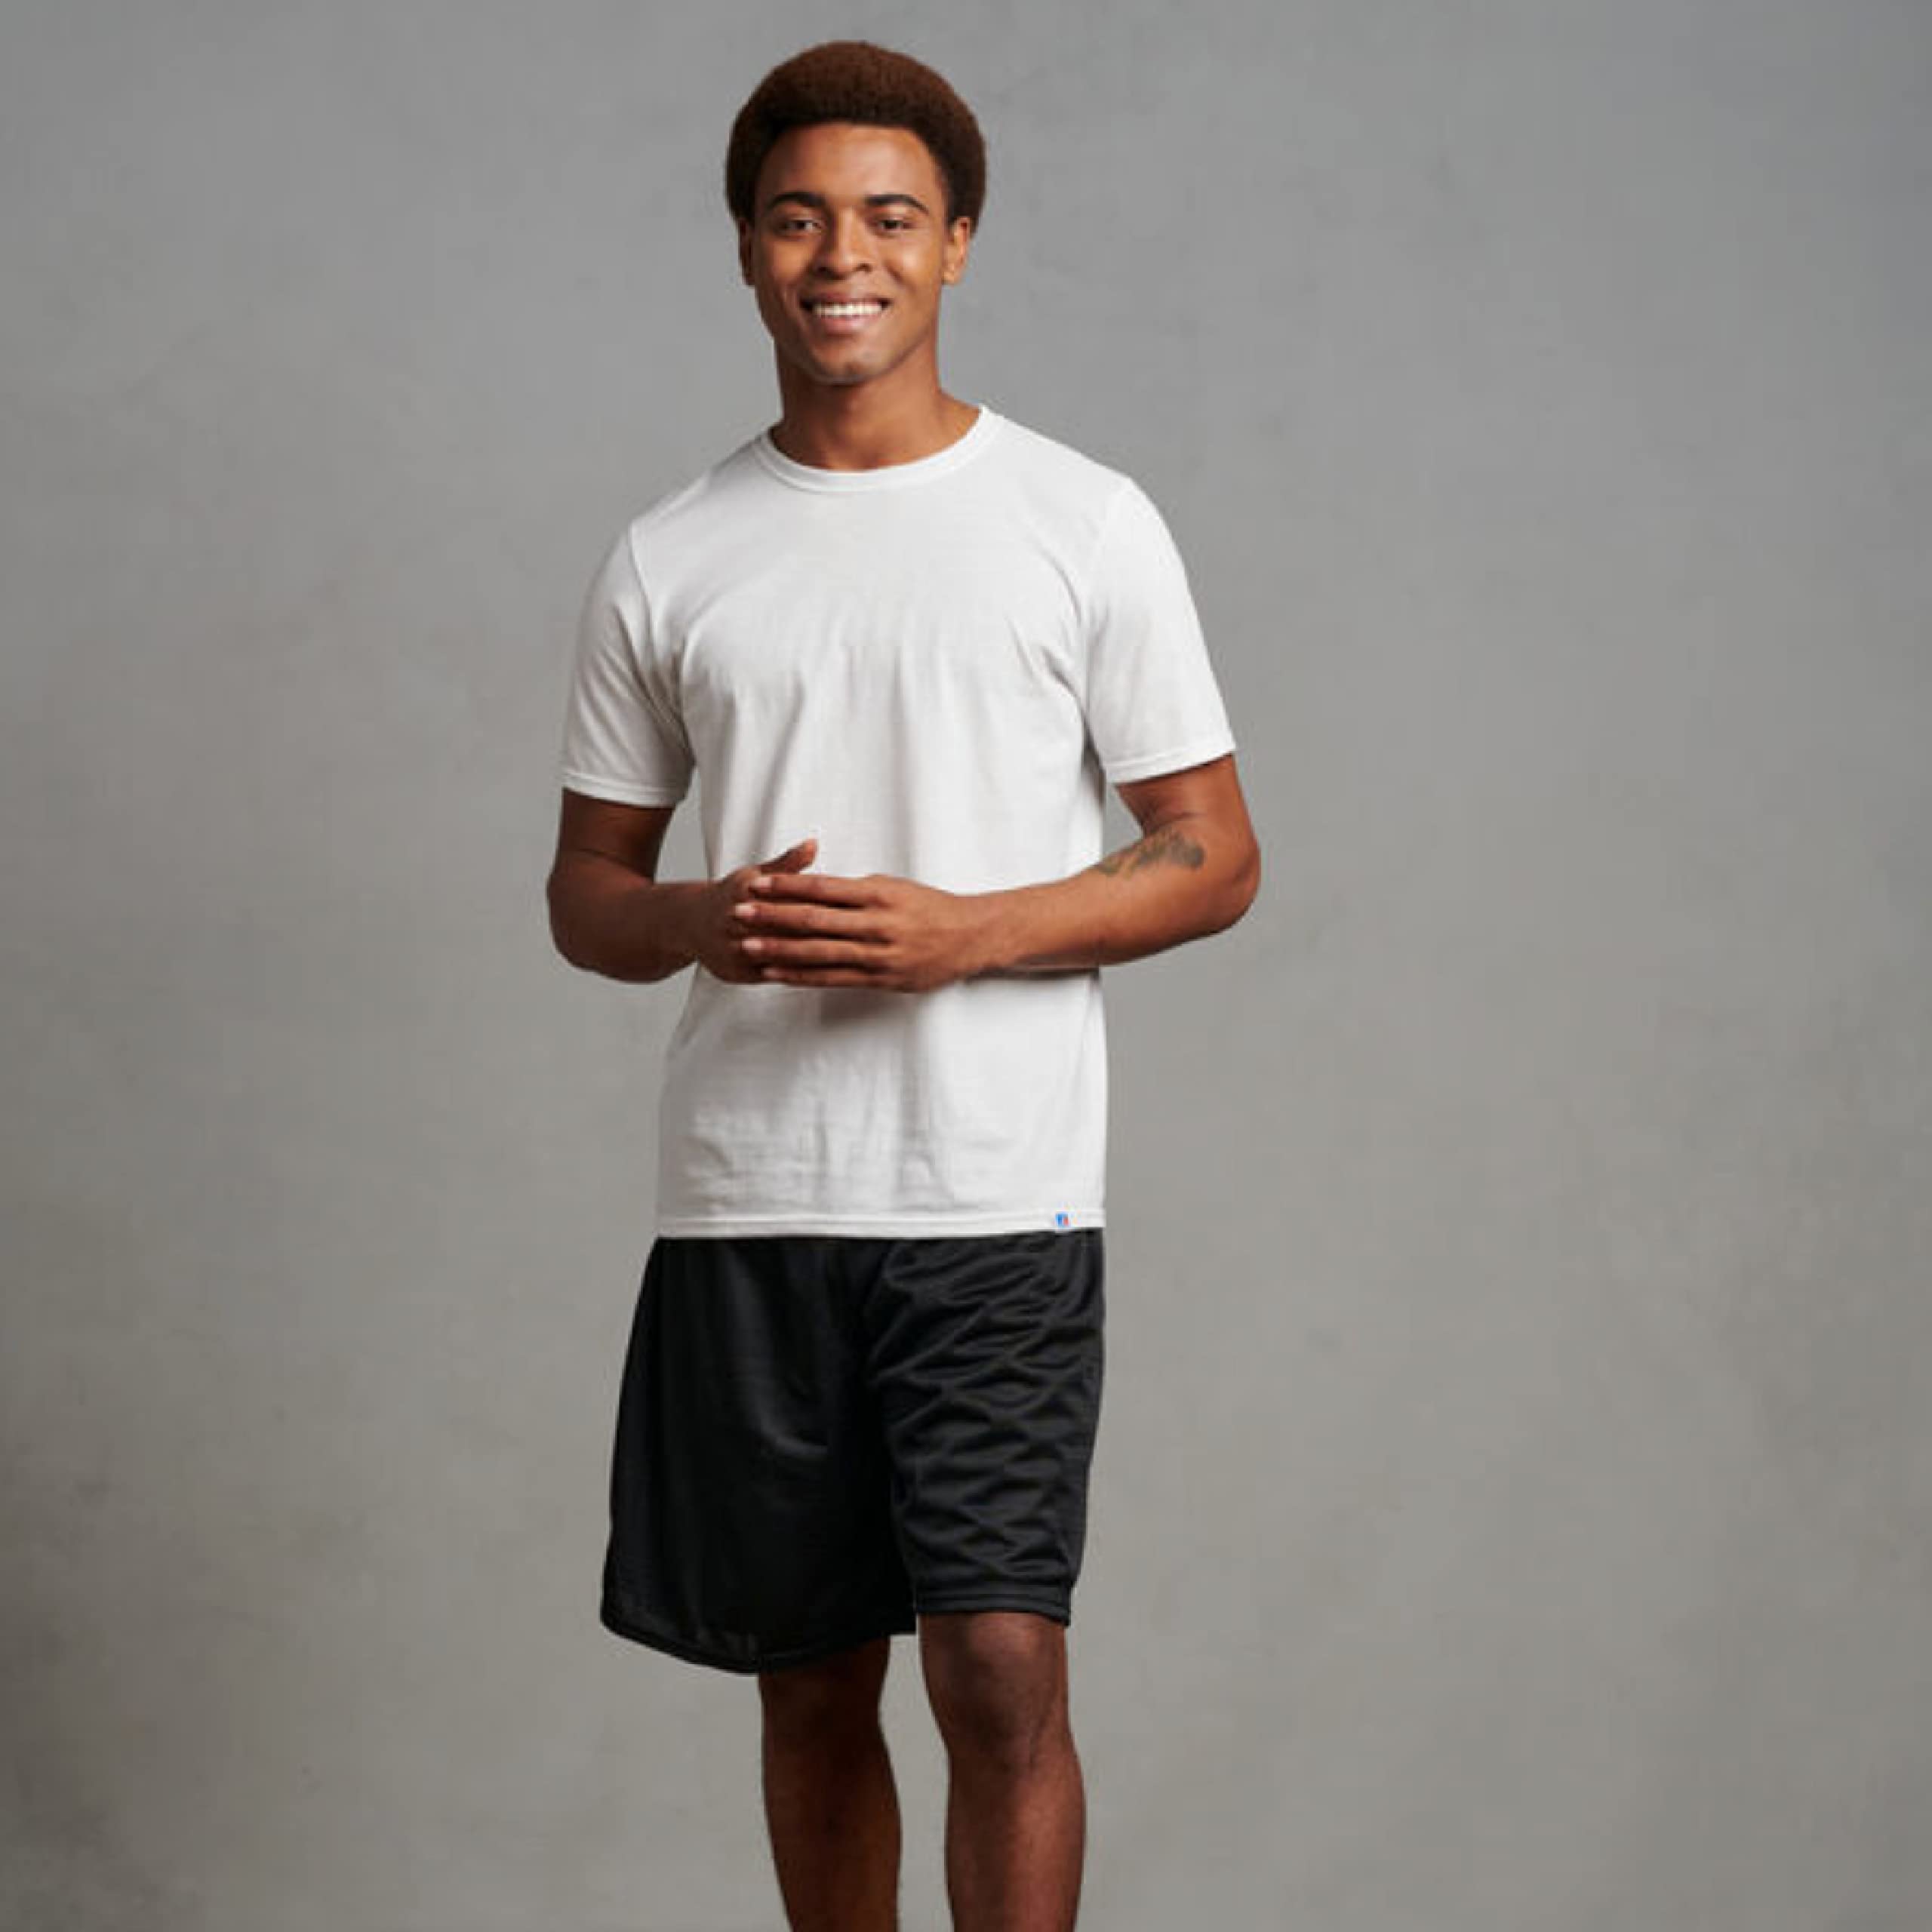 Russell Athletic Big Boys' Youth Mesh Short